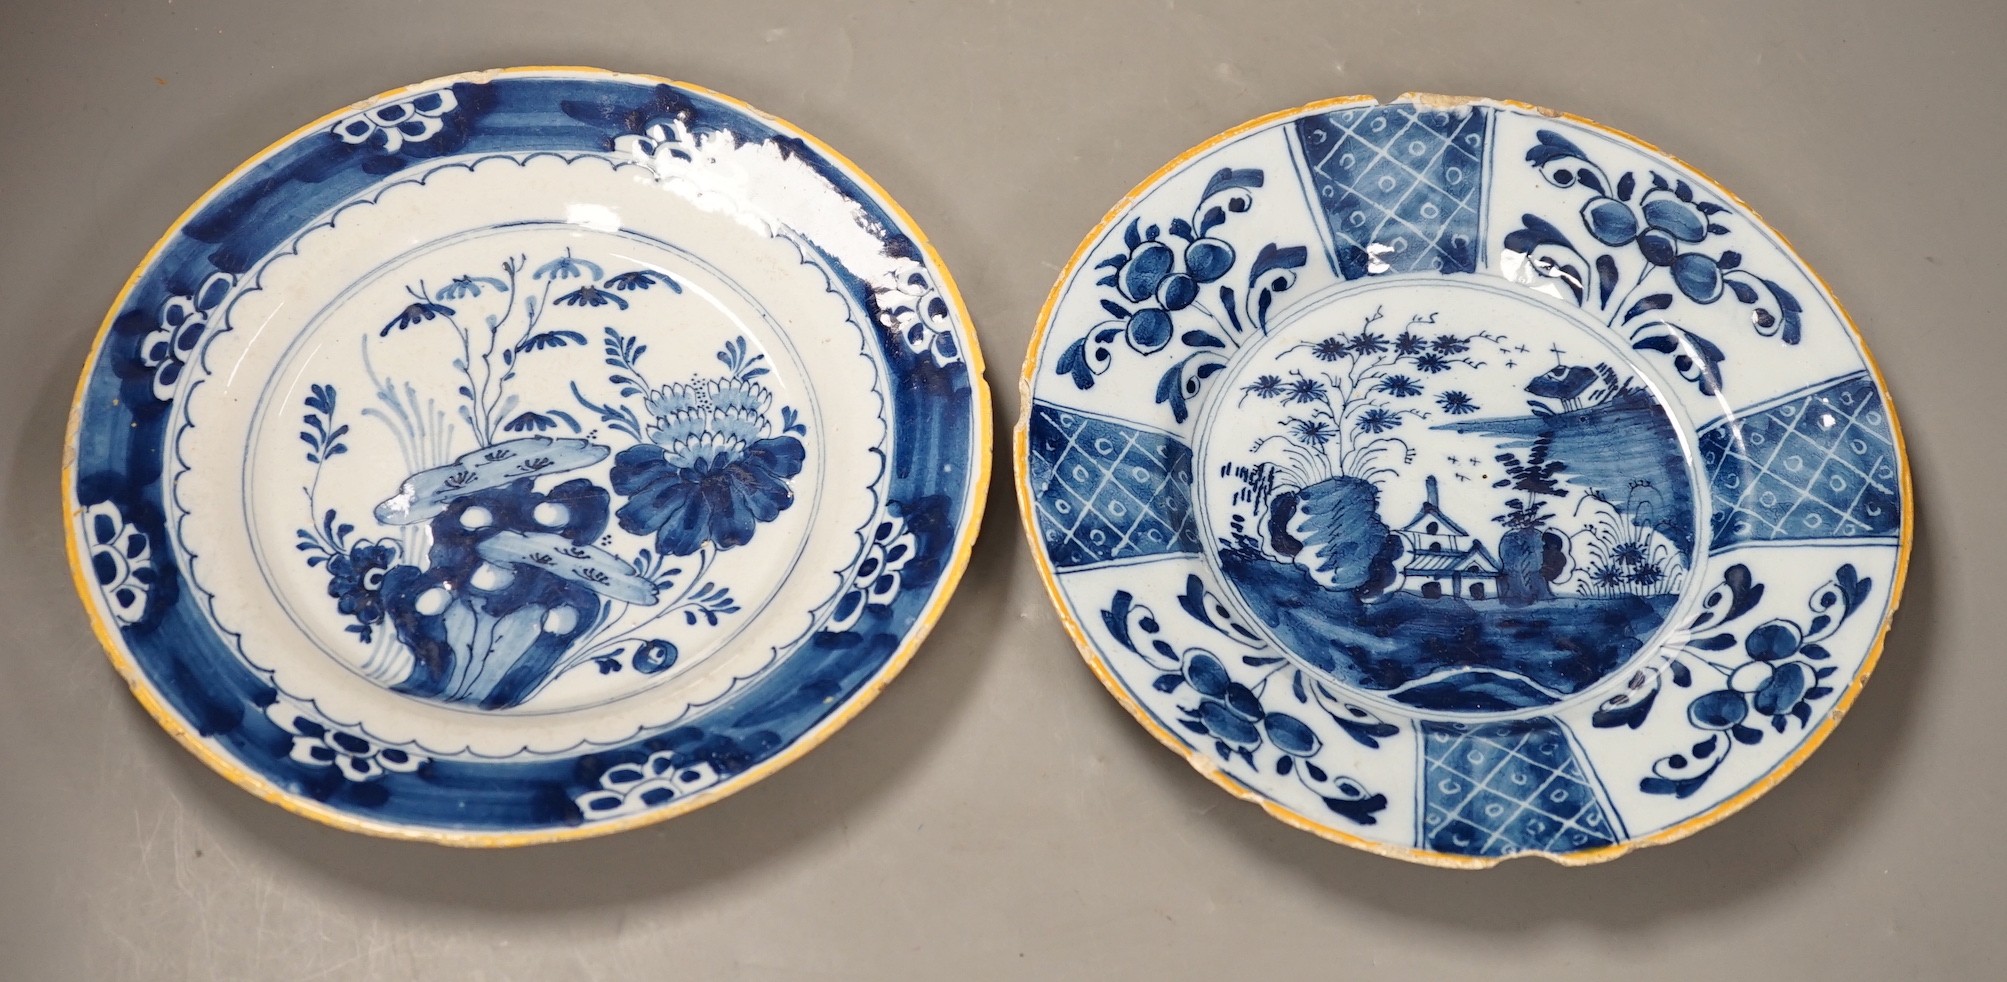 Two 18th century Dutch Delft blue and white plates, largest 23cms diameter